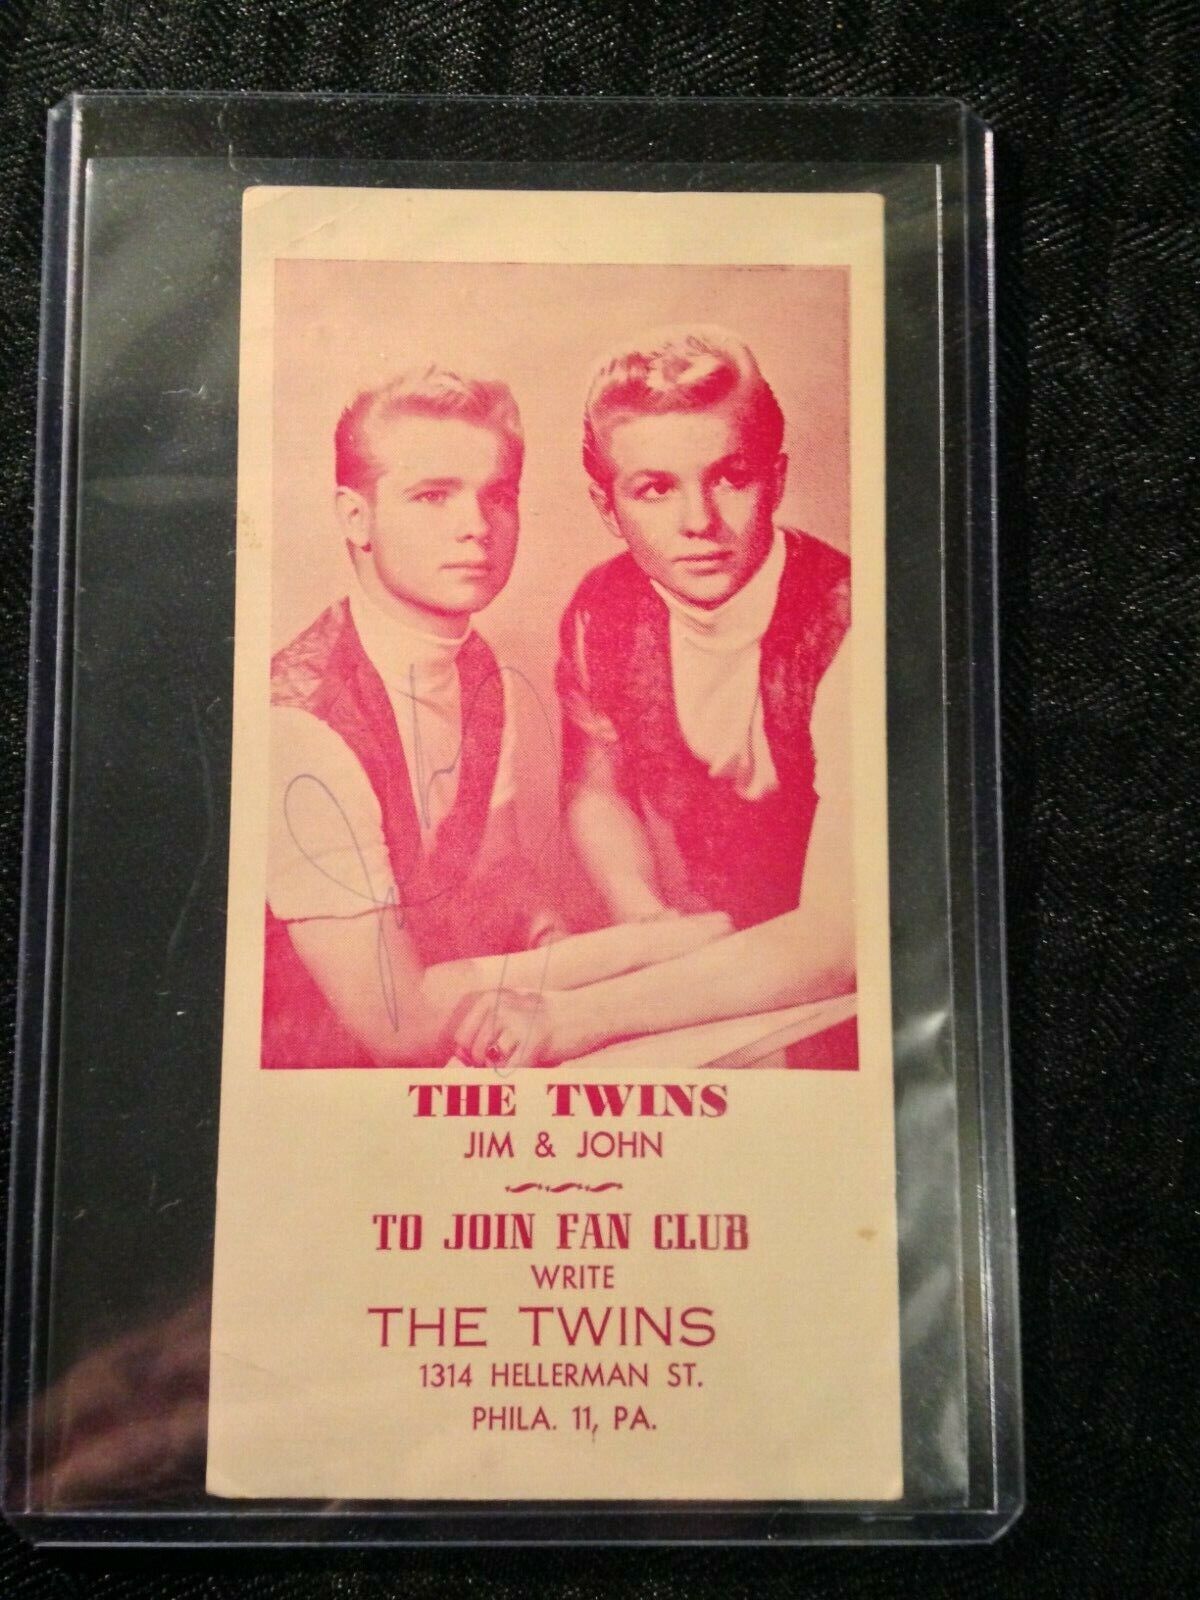 50s Group Rocker Doo Wop Teen PS EP 45 THE TWINS VTG Signed Card / AD